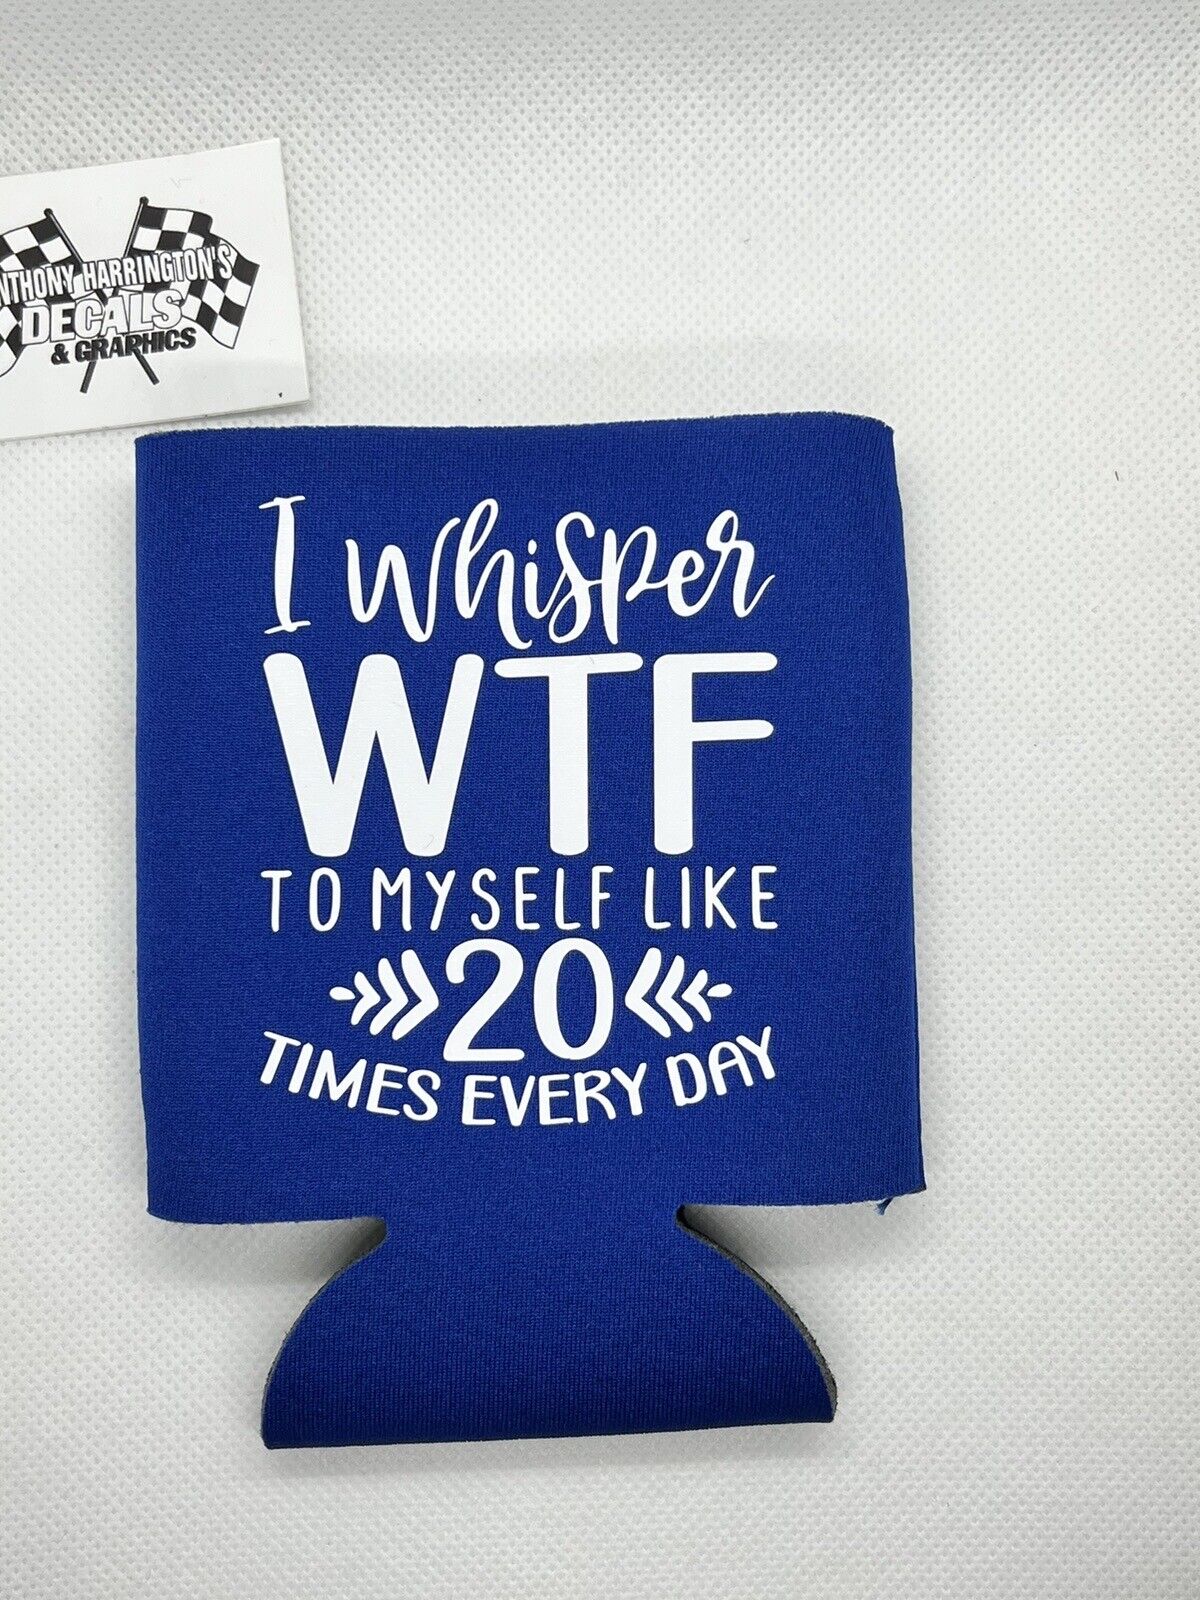 I Whisper Wtf To Myself 20x A Day Funny Novelty Can Cooler Koozie BlueVersion